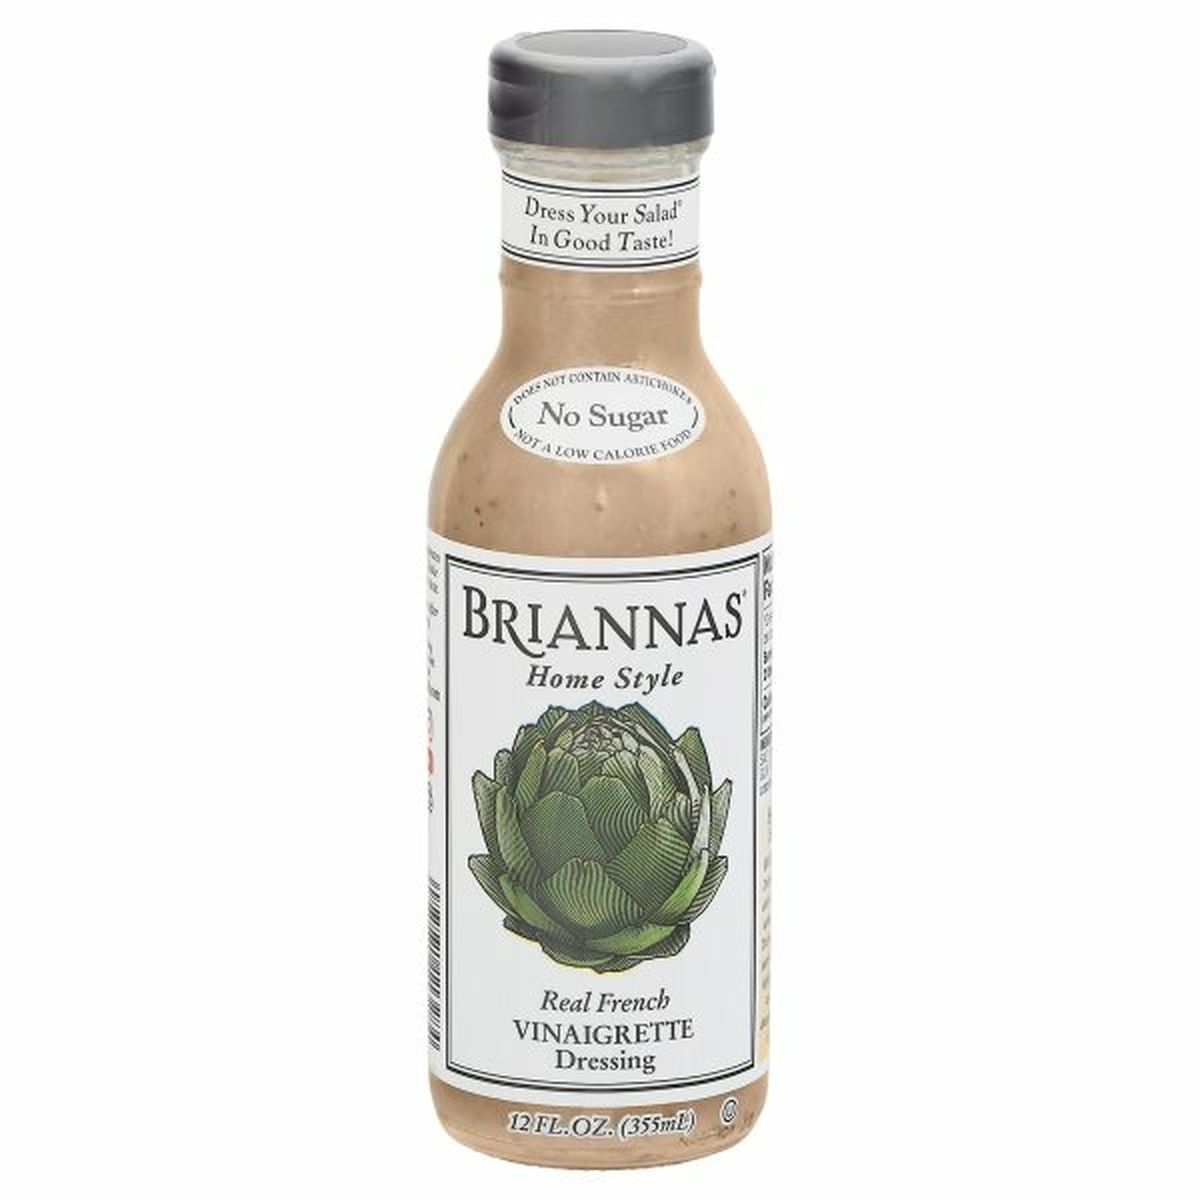 Calories in Brianna's Dressing, Real French Vinaigrette, Home Style